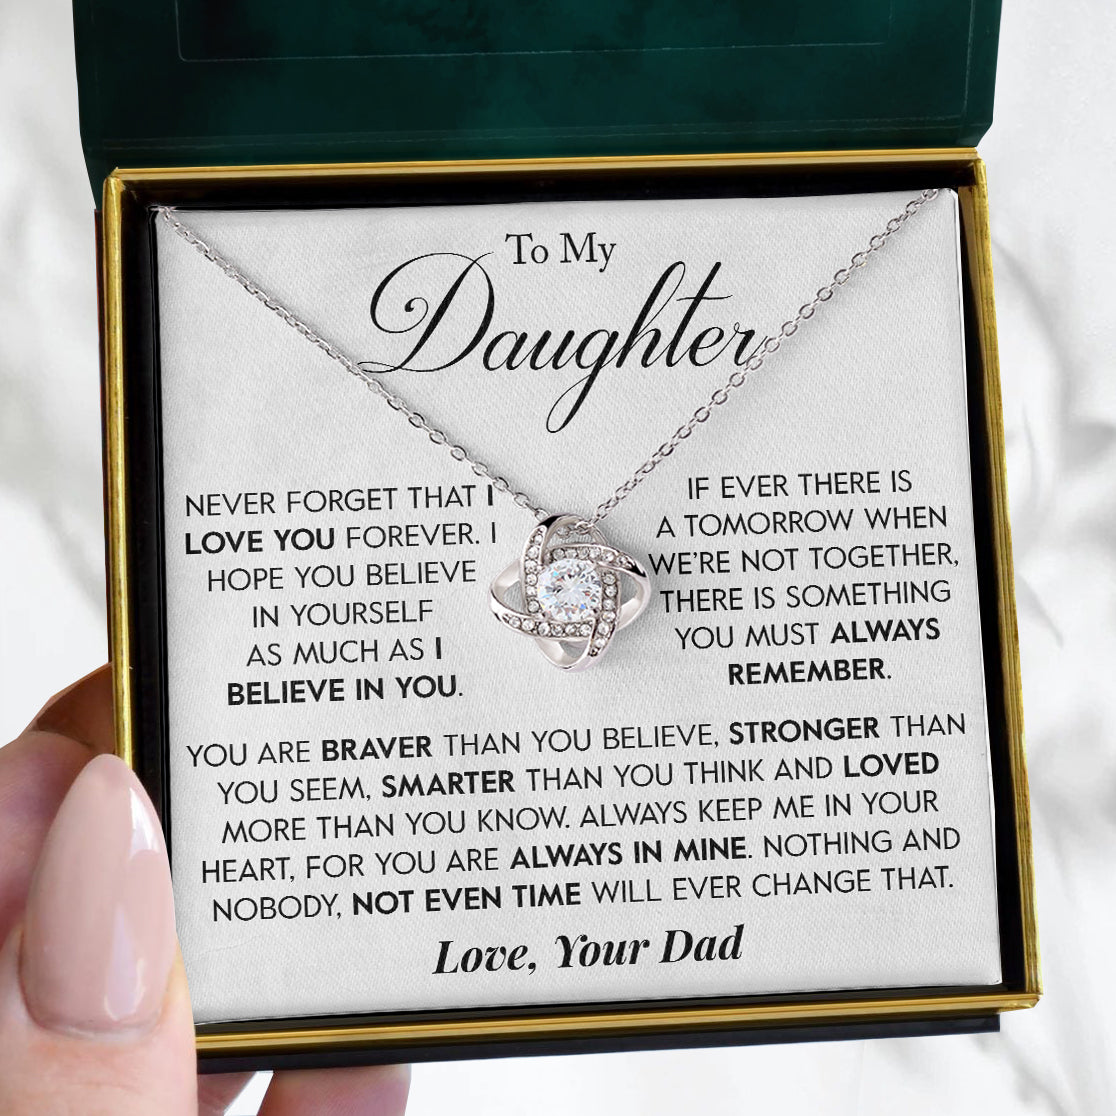 To My Daughter | "Not Even Time" | Love Knot Necklace